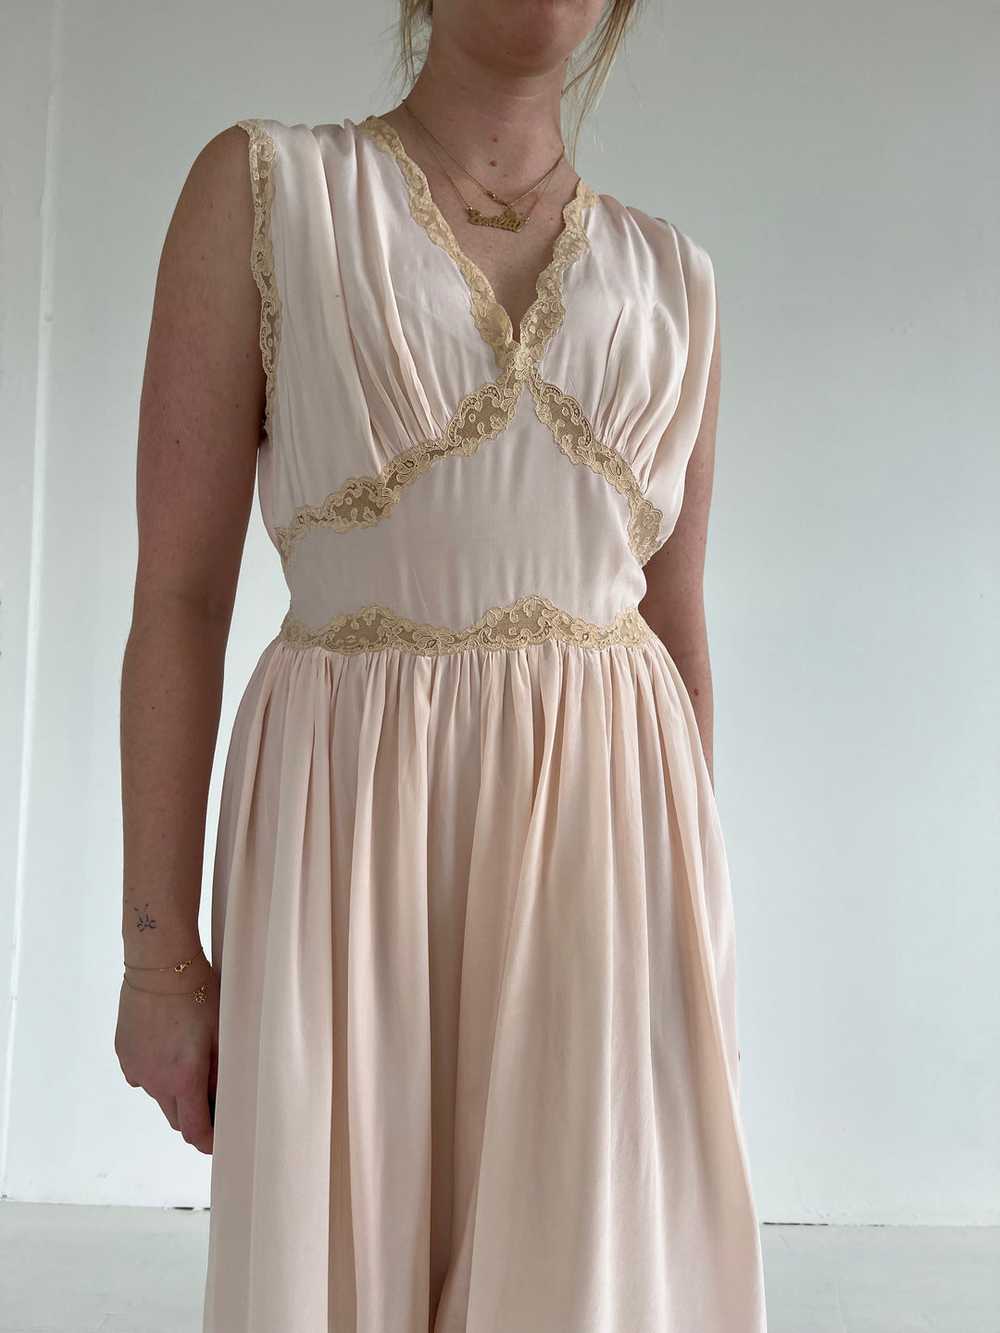 1930's Pale Pink Silk Slip Dress with Cream Lace - image 2